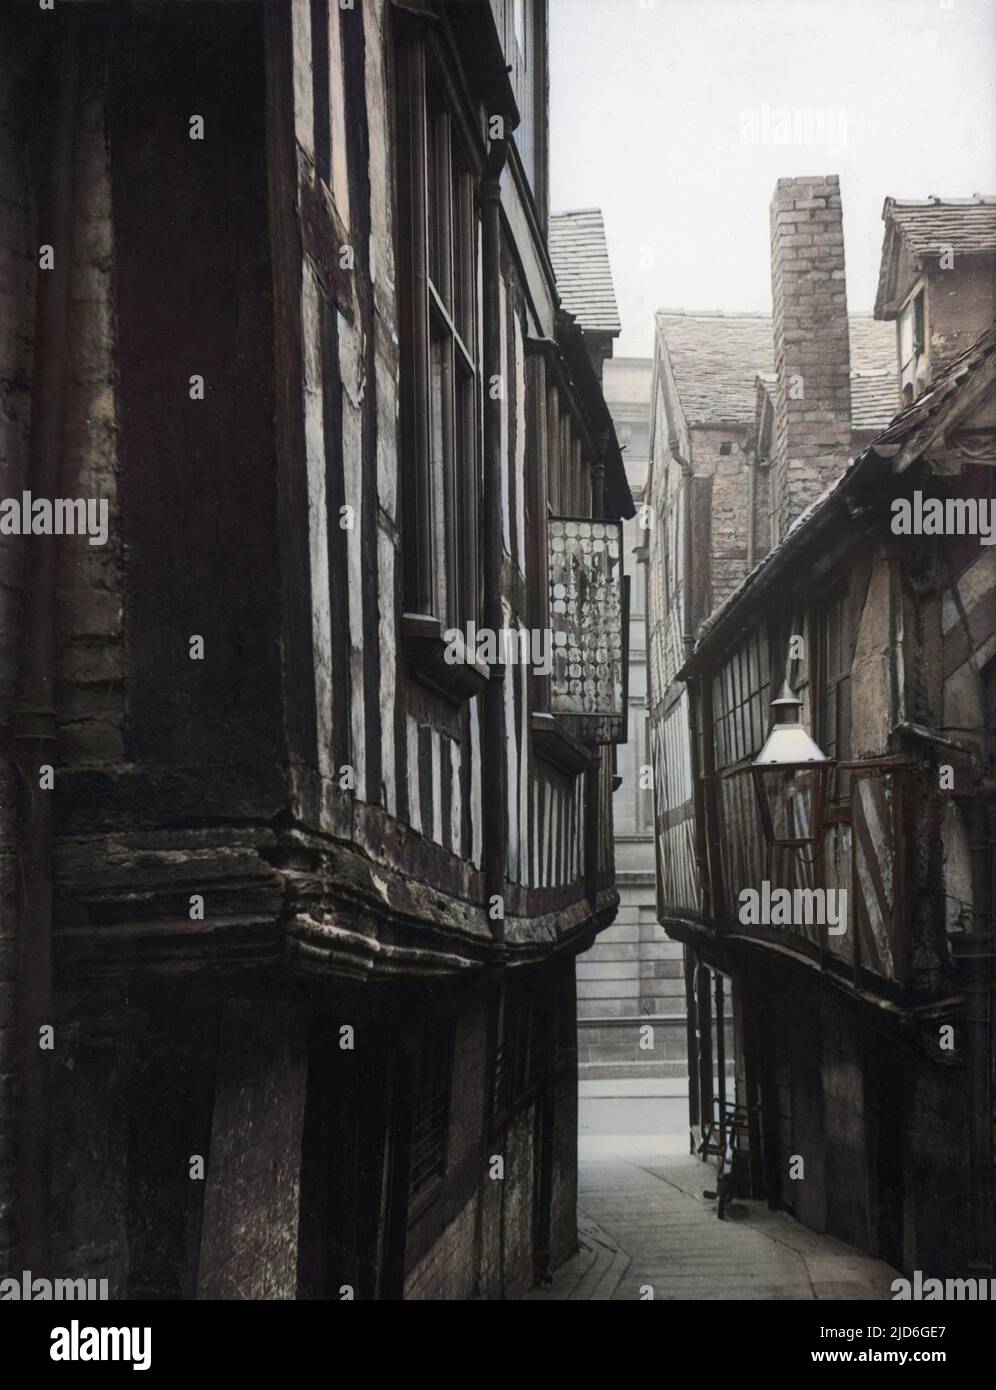 Grope Lane, a quaint medieval alley off the High Street at Shrewsbury, Shropshire, England. Colourised version of : 10171999       Date: 1930s Stock Photo